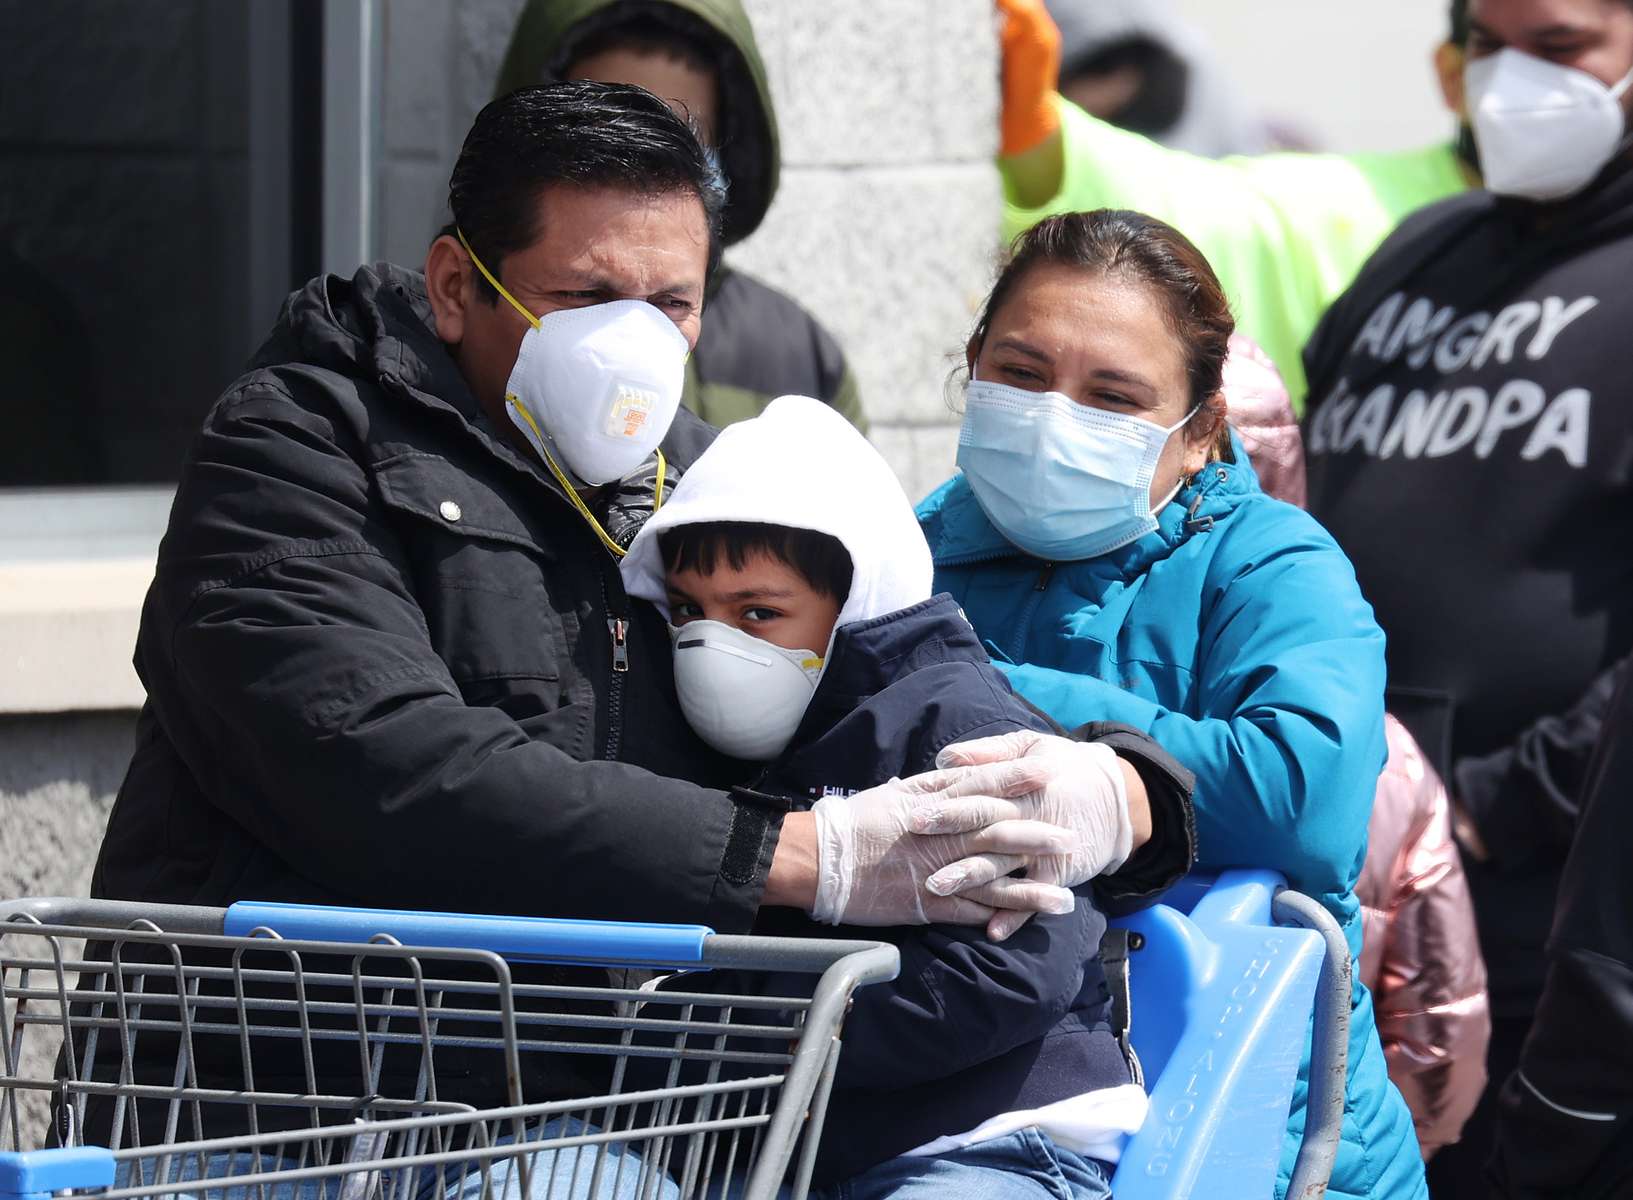 People wearing masks and gloves wait to enter Walmart on April 17, 2020 in Uniondale, New York. The World Health Organization declared coronavirus (COVID-19) a global pandemic on March 11th.  